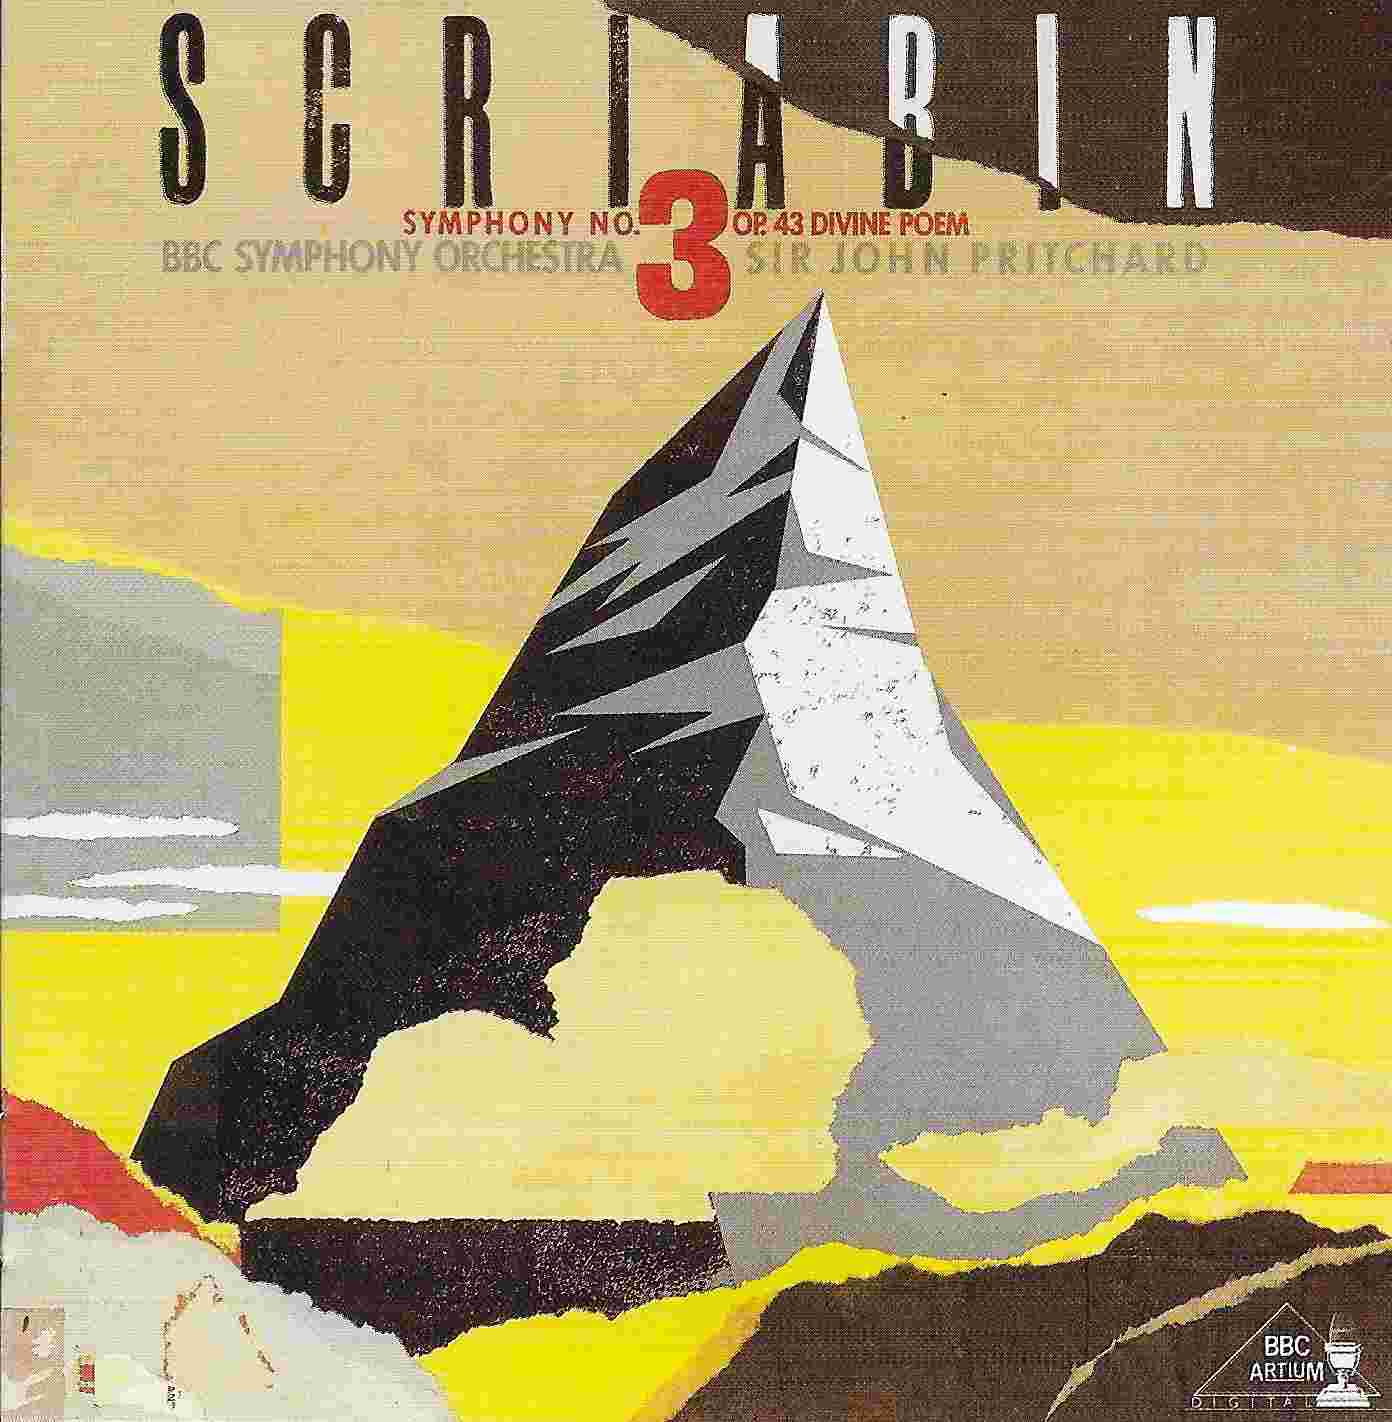 Picture of Scriabin symphony number 3 by artist Scriabin from the BBC cds - Records and Tapes library